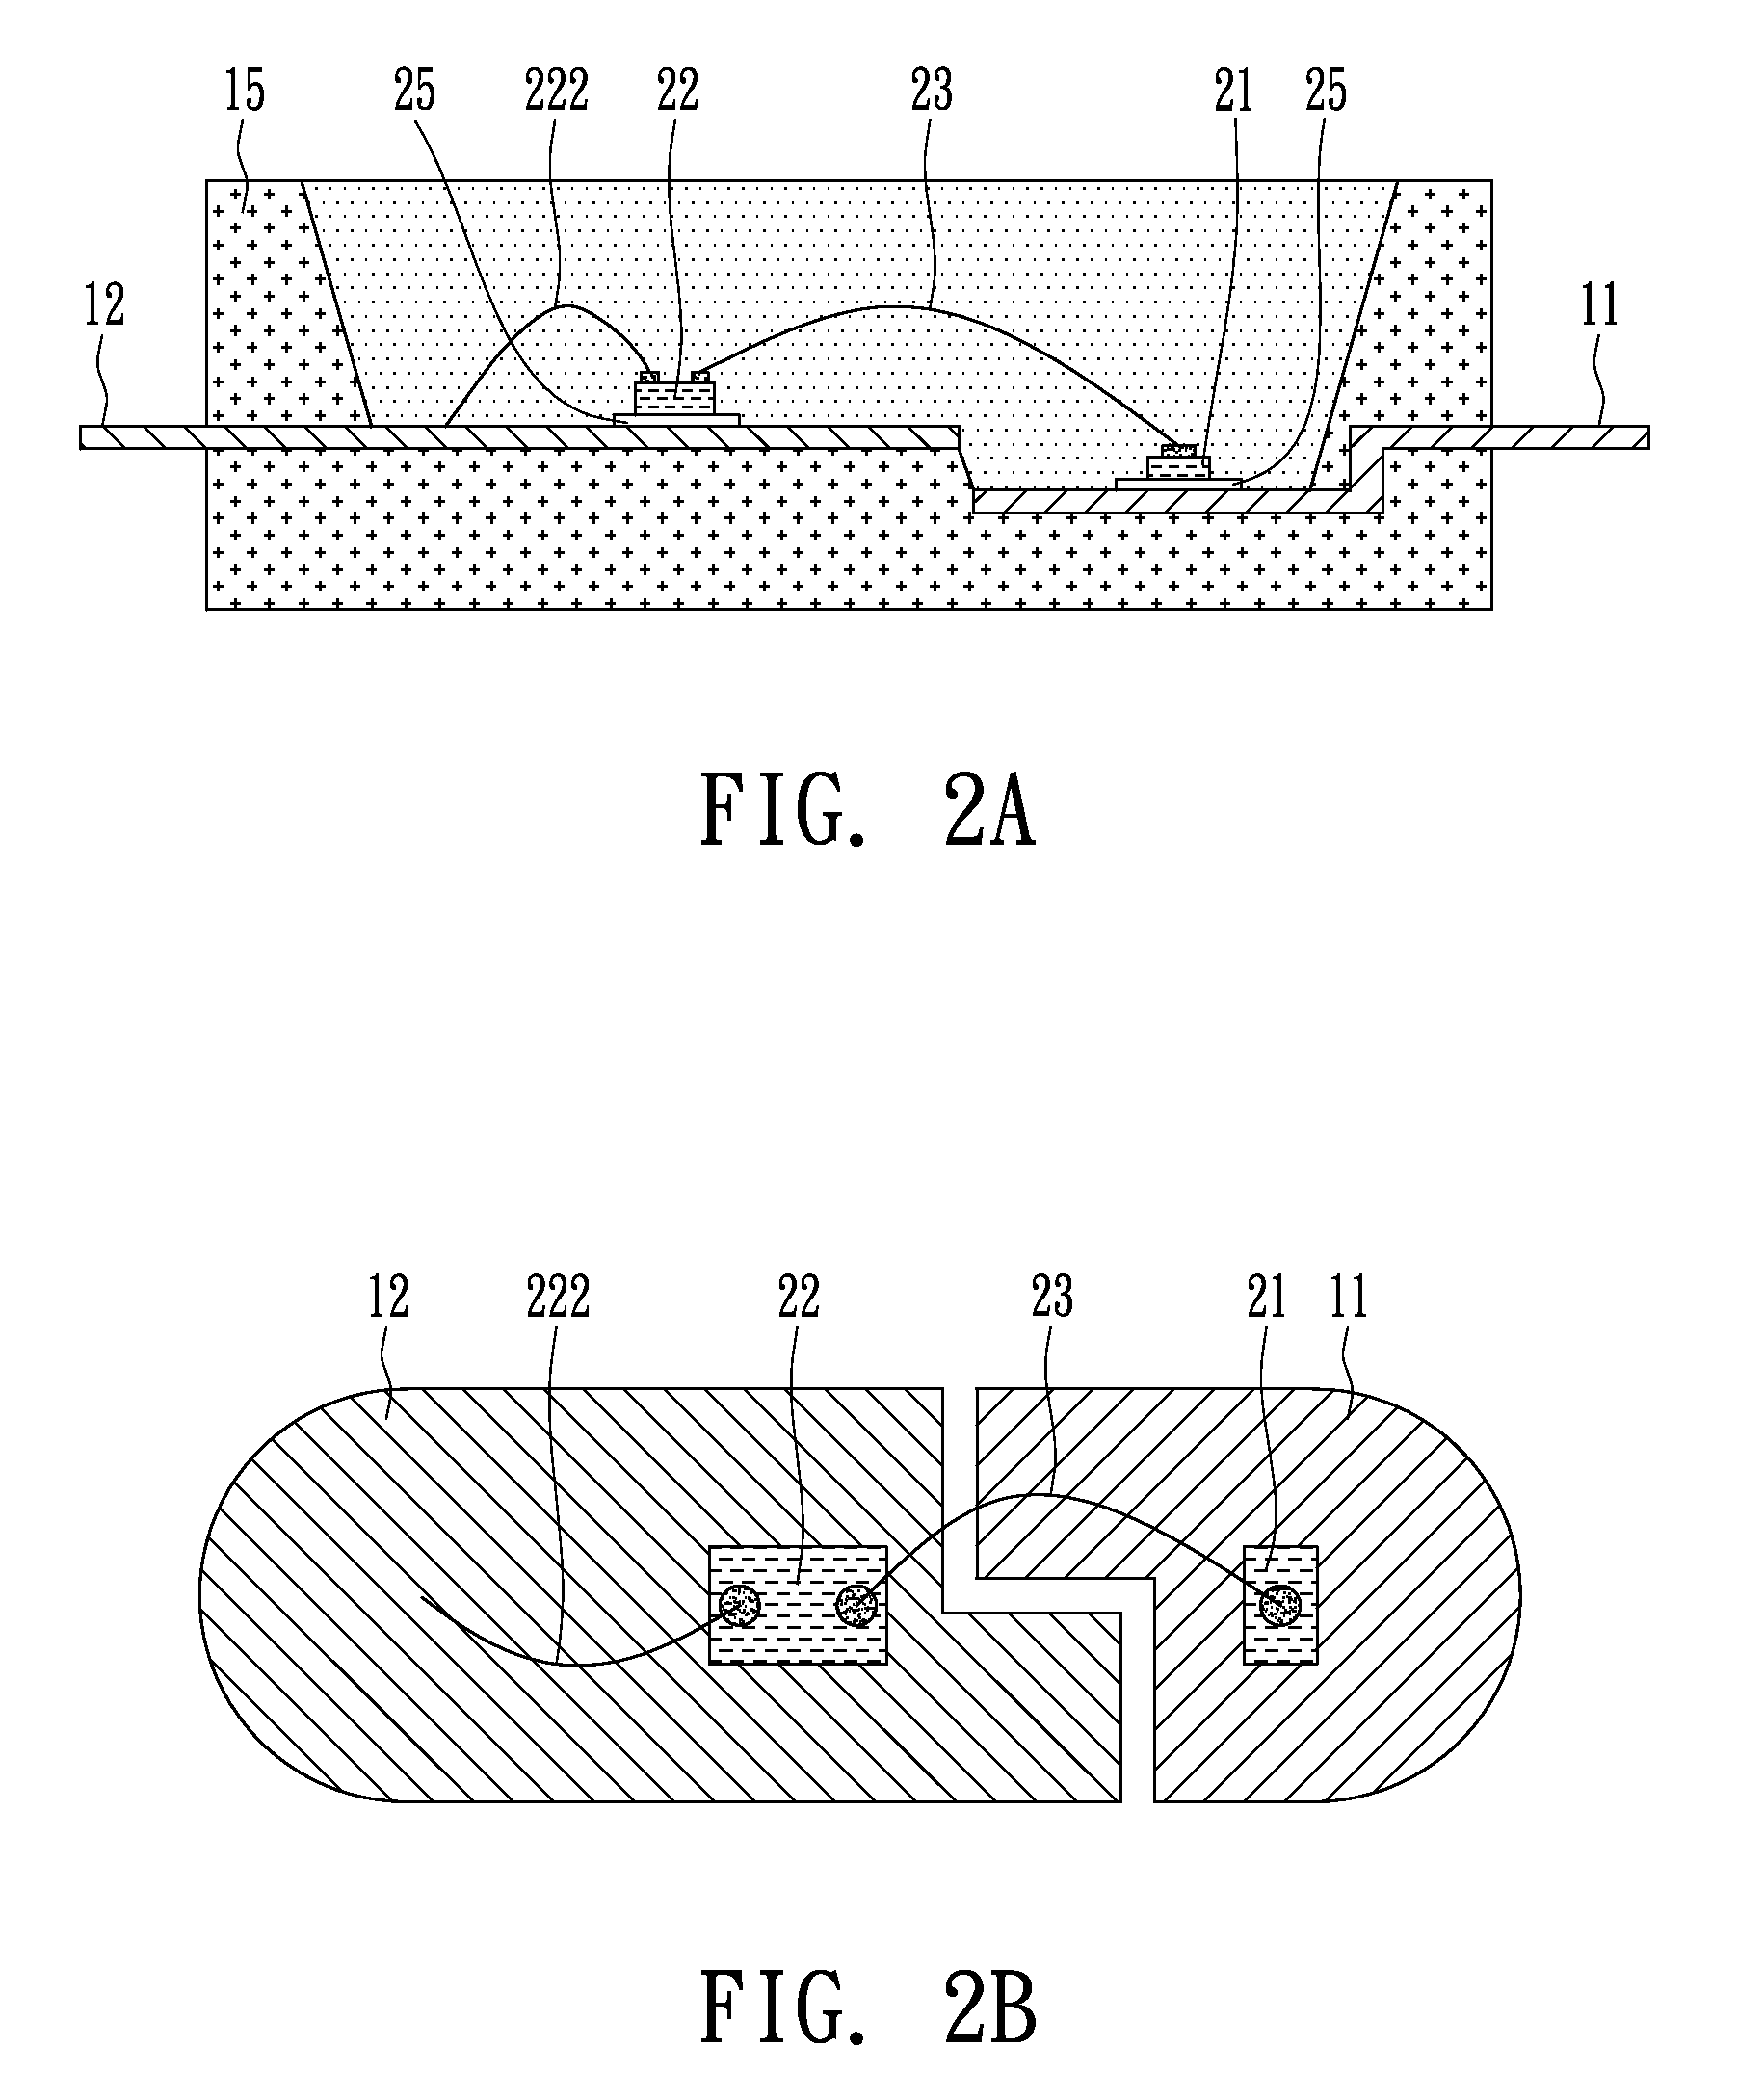 Package structure of light emitting diode for backlight